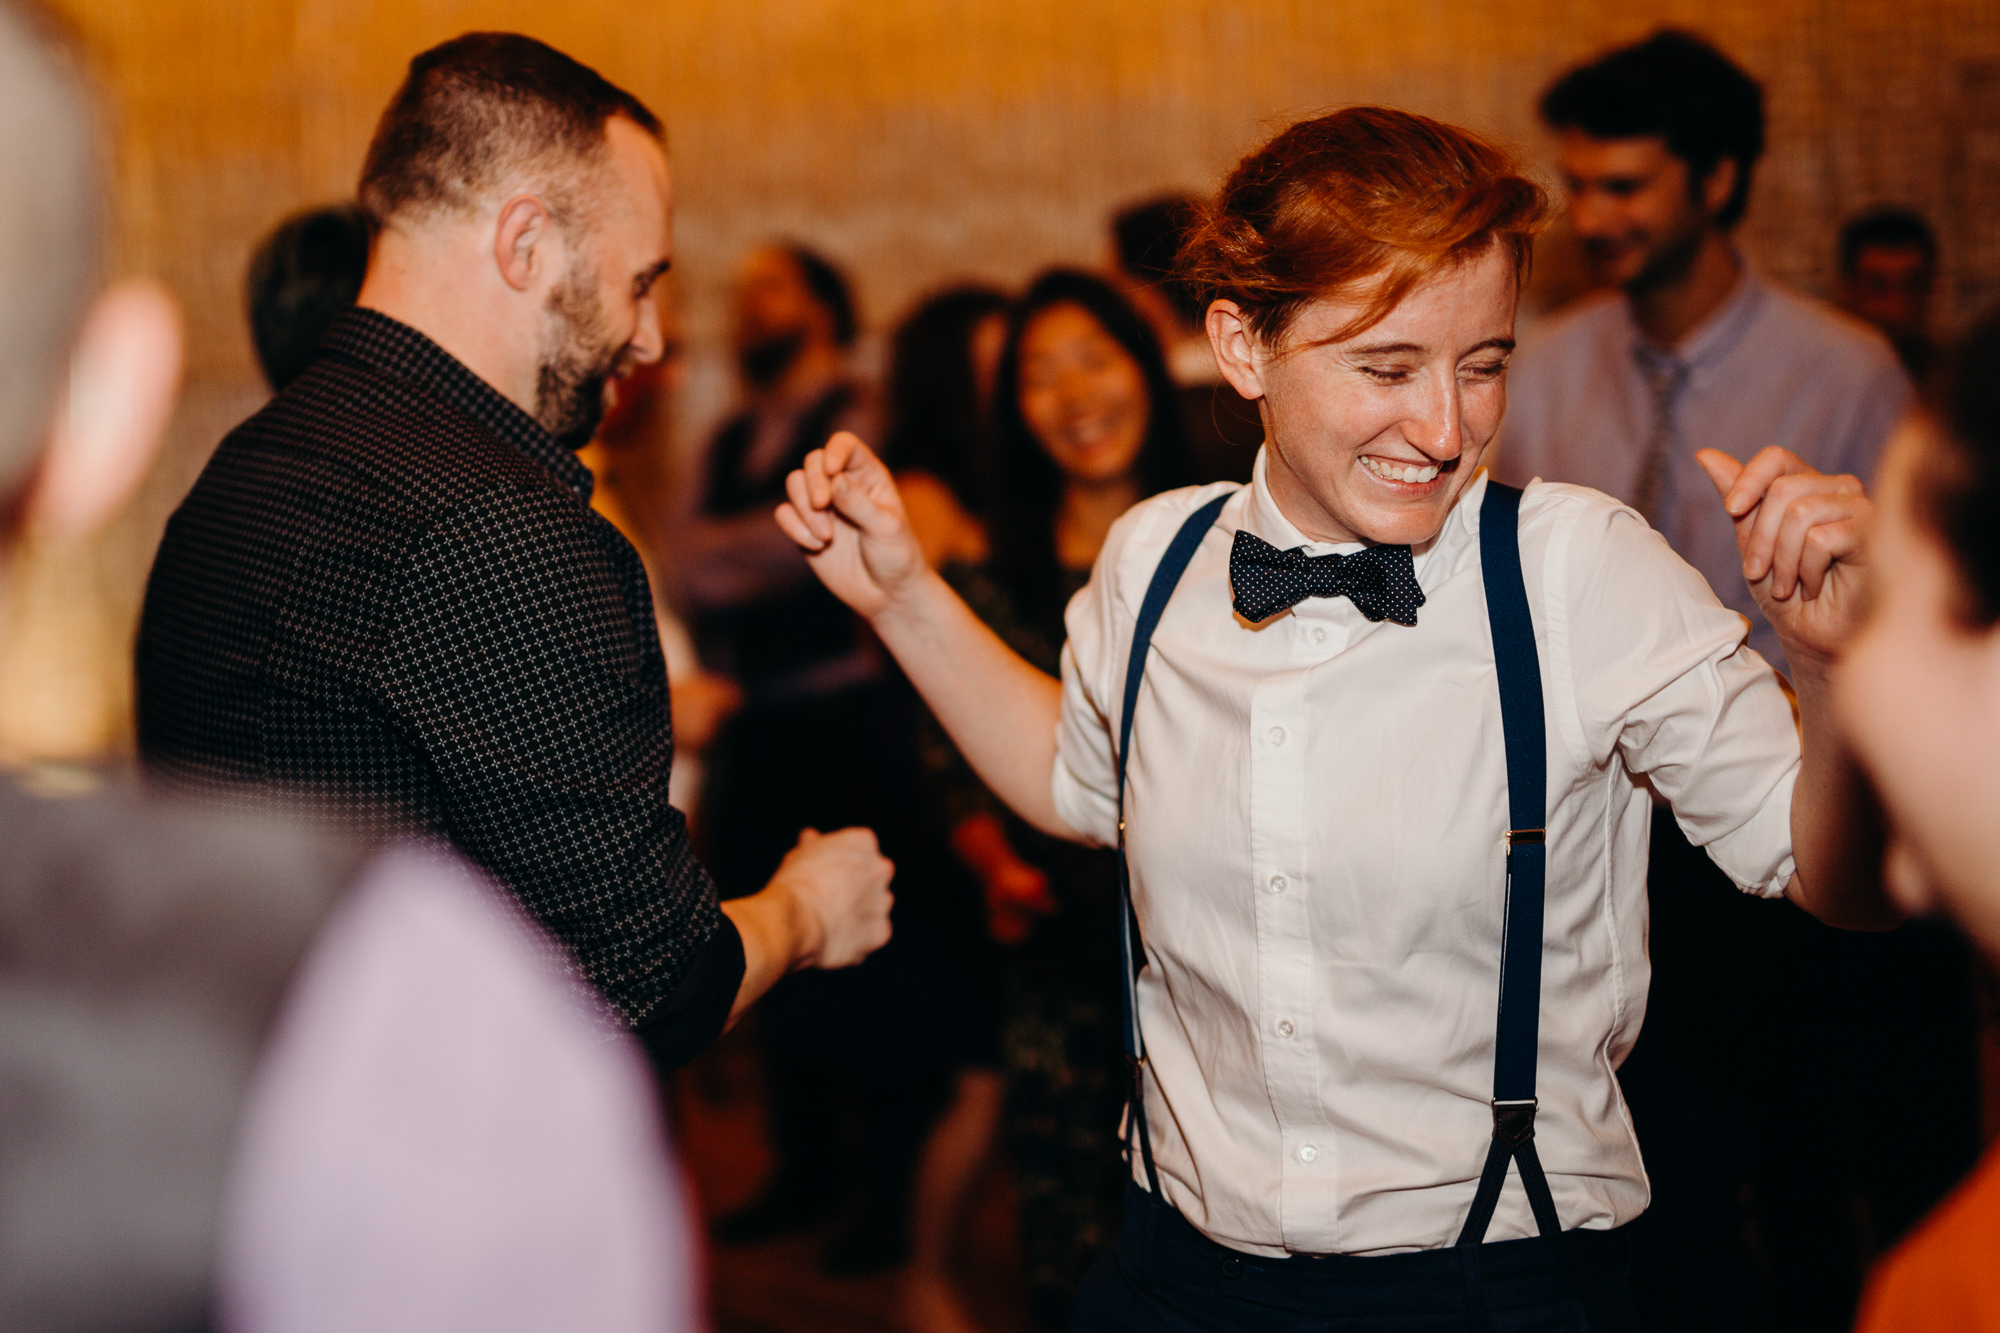 a guest dances during a wedding reception at dumbo loft in brooklyn, ny